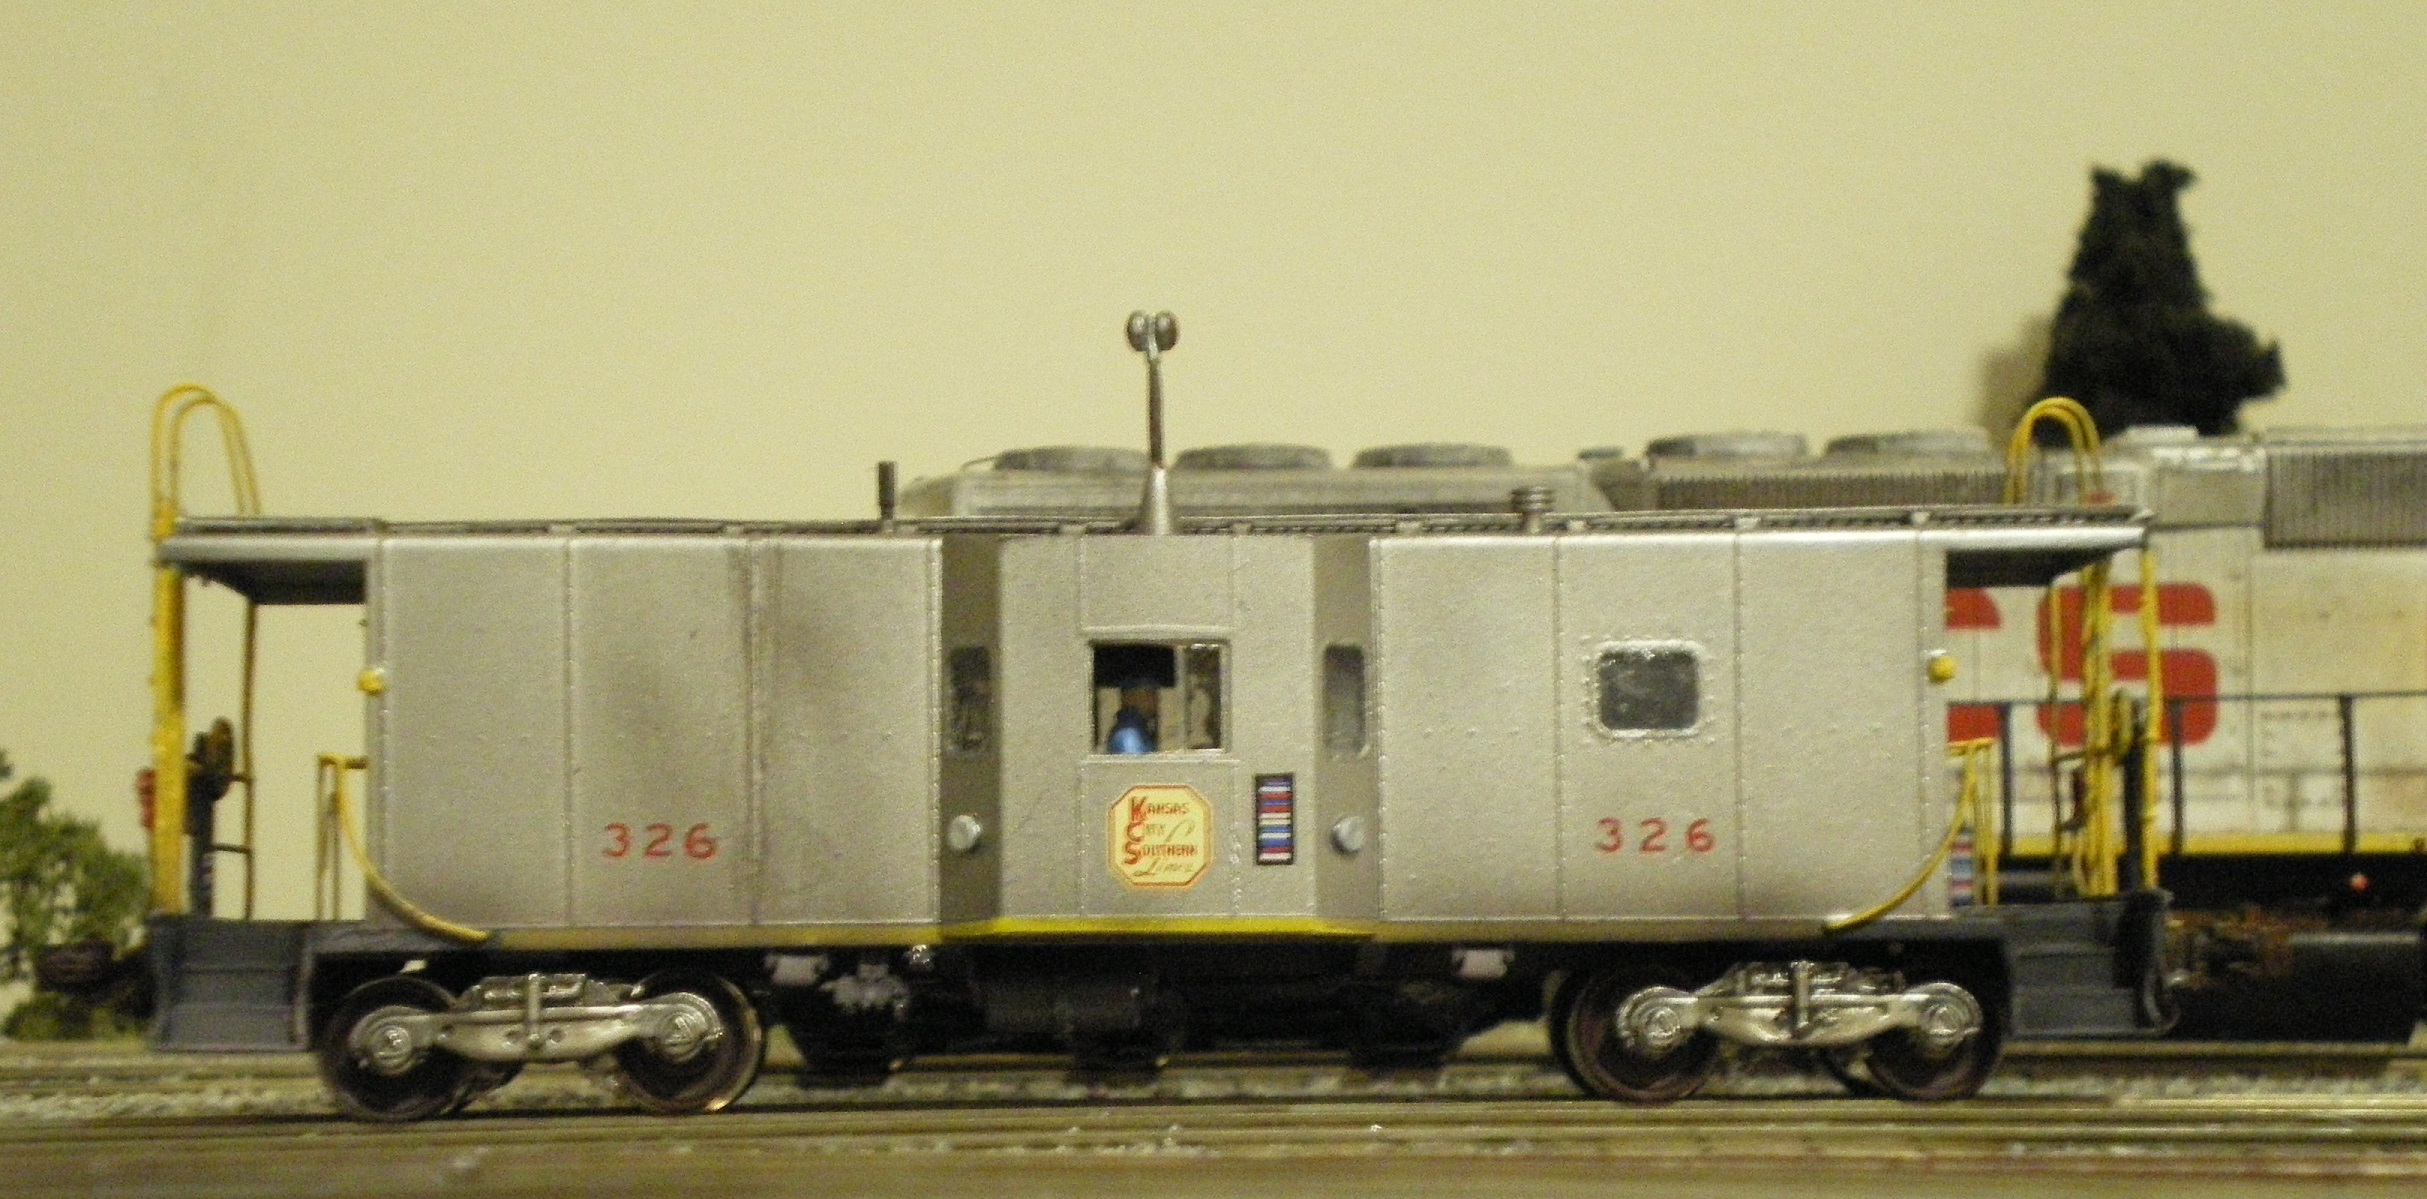 KCS Stainless Steel Caboose